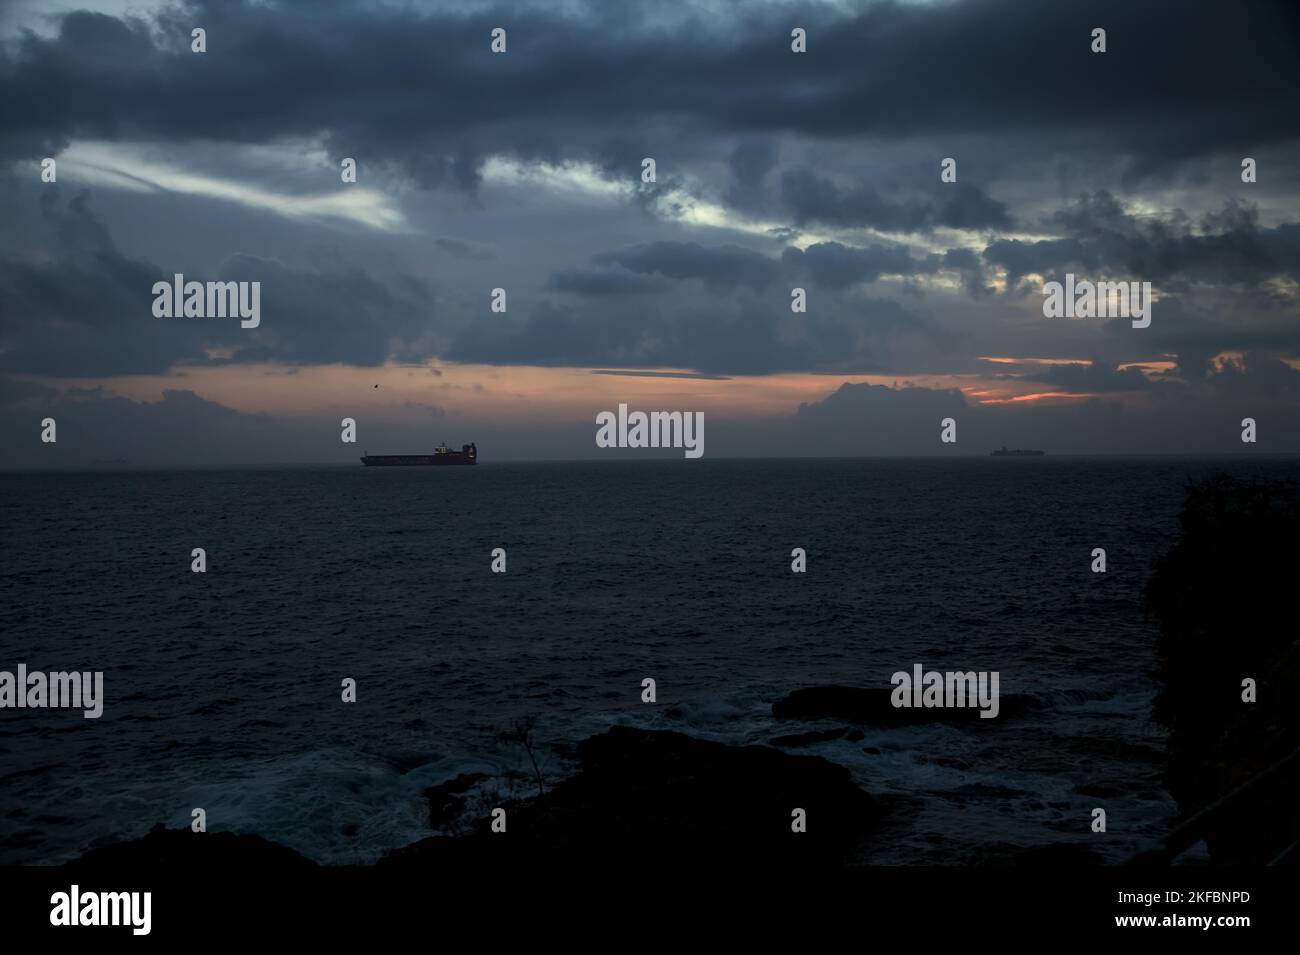 Sea  on a cloudy day at dusk with a cargo ship on the horizon Stock Photo